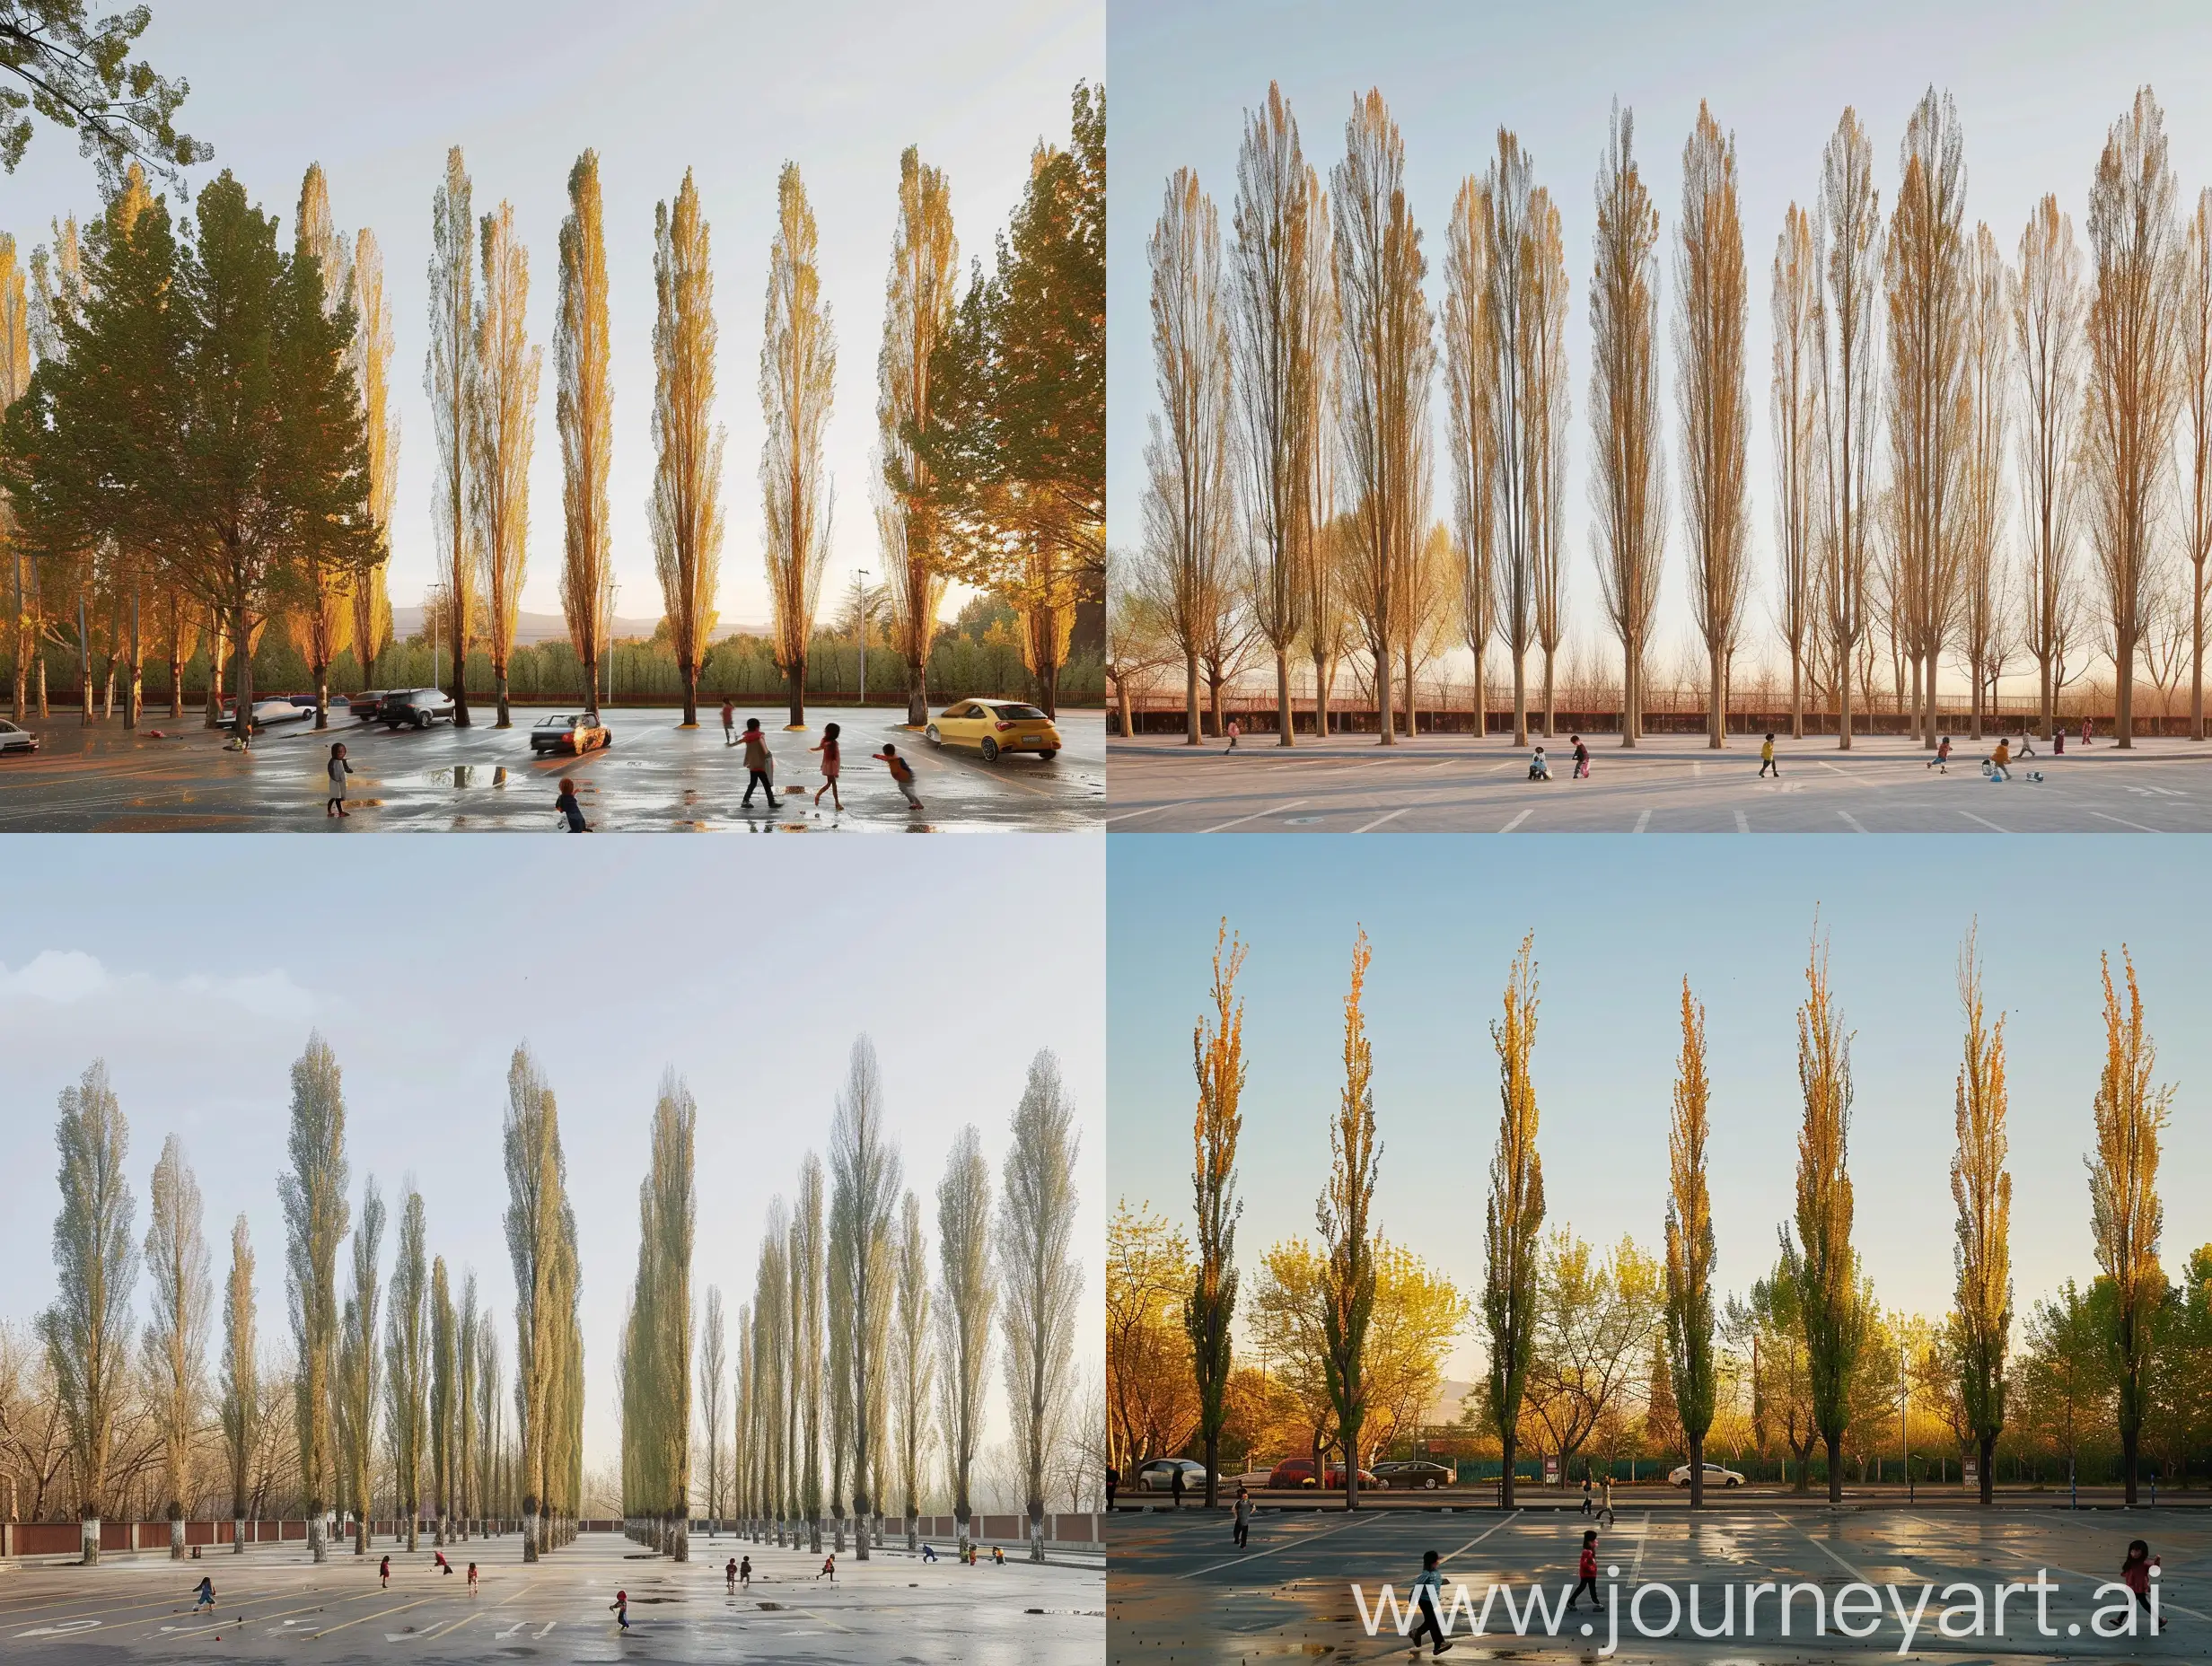 Happy-Children-Playing-Under-Spring-Sunset-by-Tall-Poplar-Trees